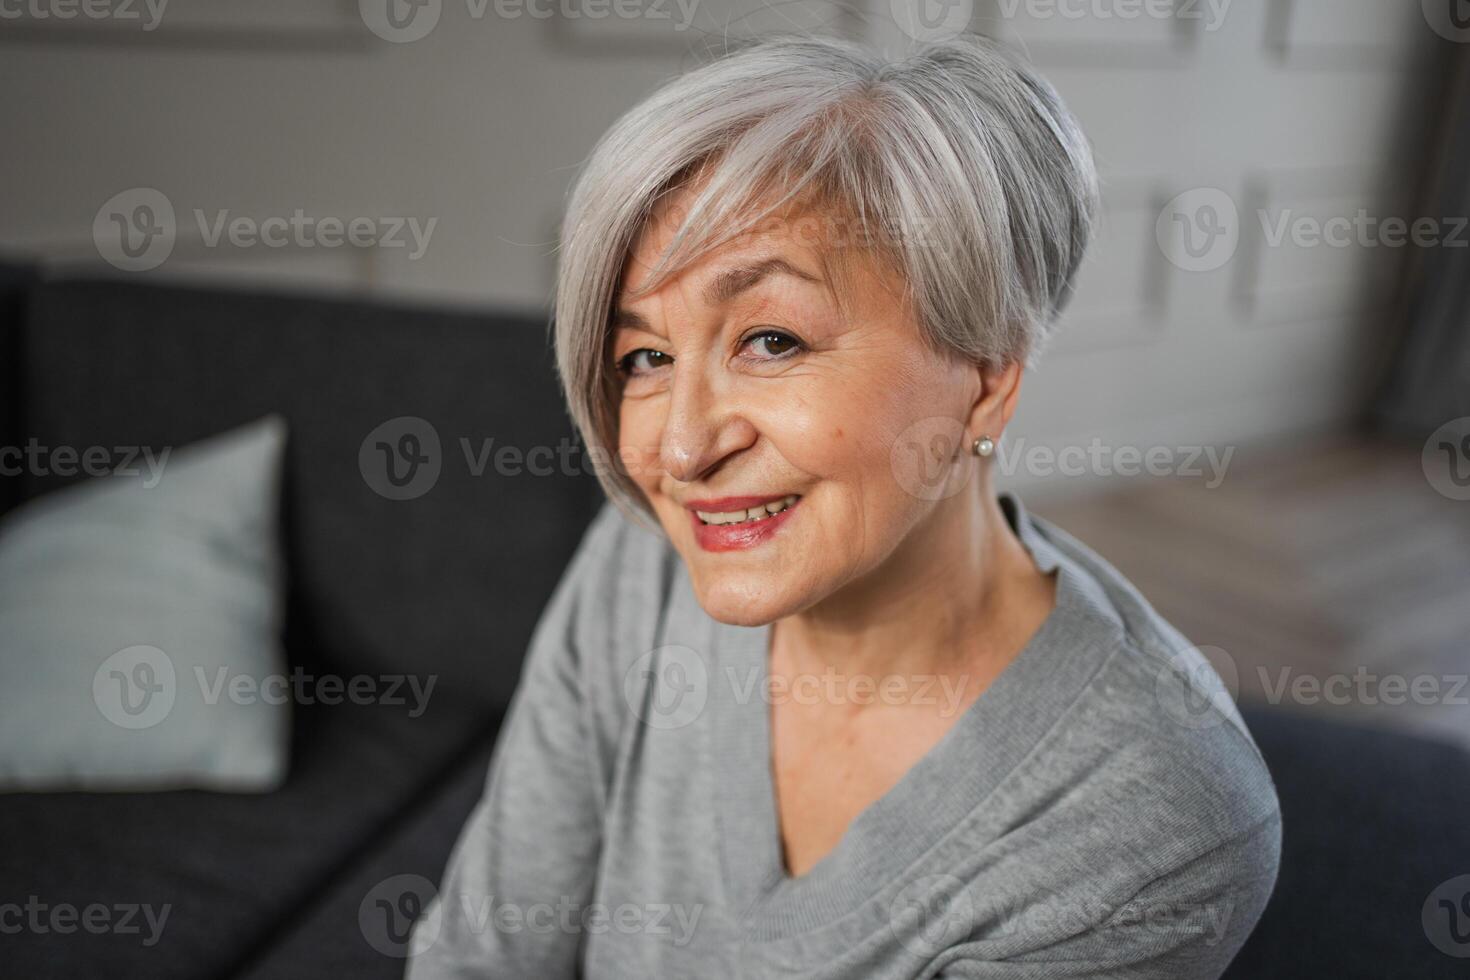 Portrait of confident stylish european middle aged senior woman. Older mature 60s lady smiling at home. Happy attractive senior female looking camera close up face headshot portrait. Happy people photo